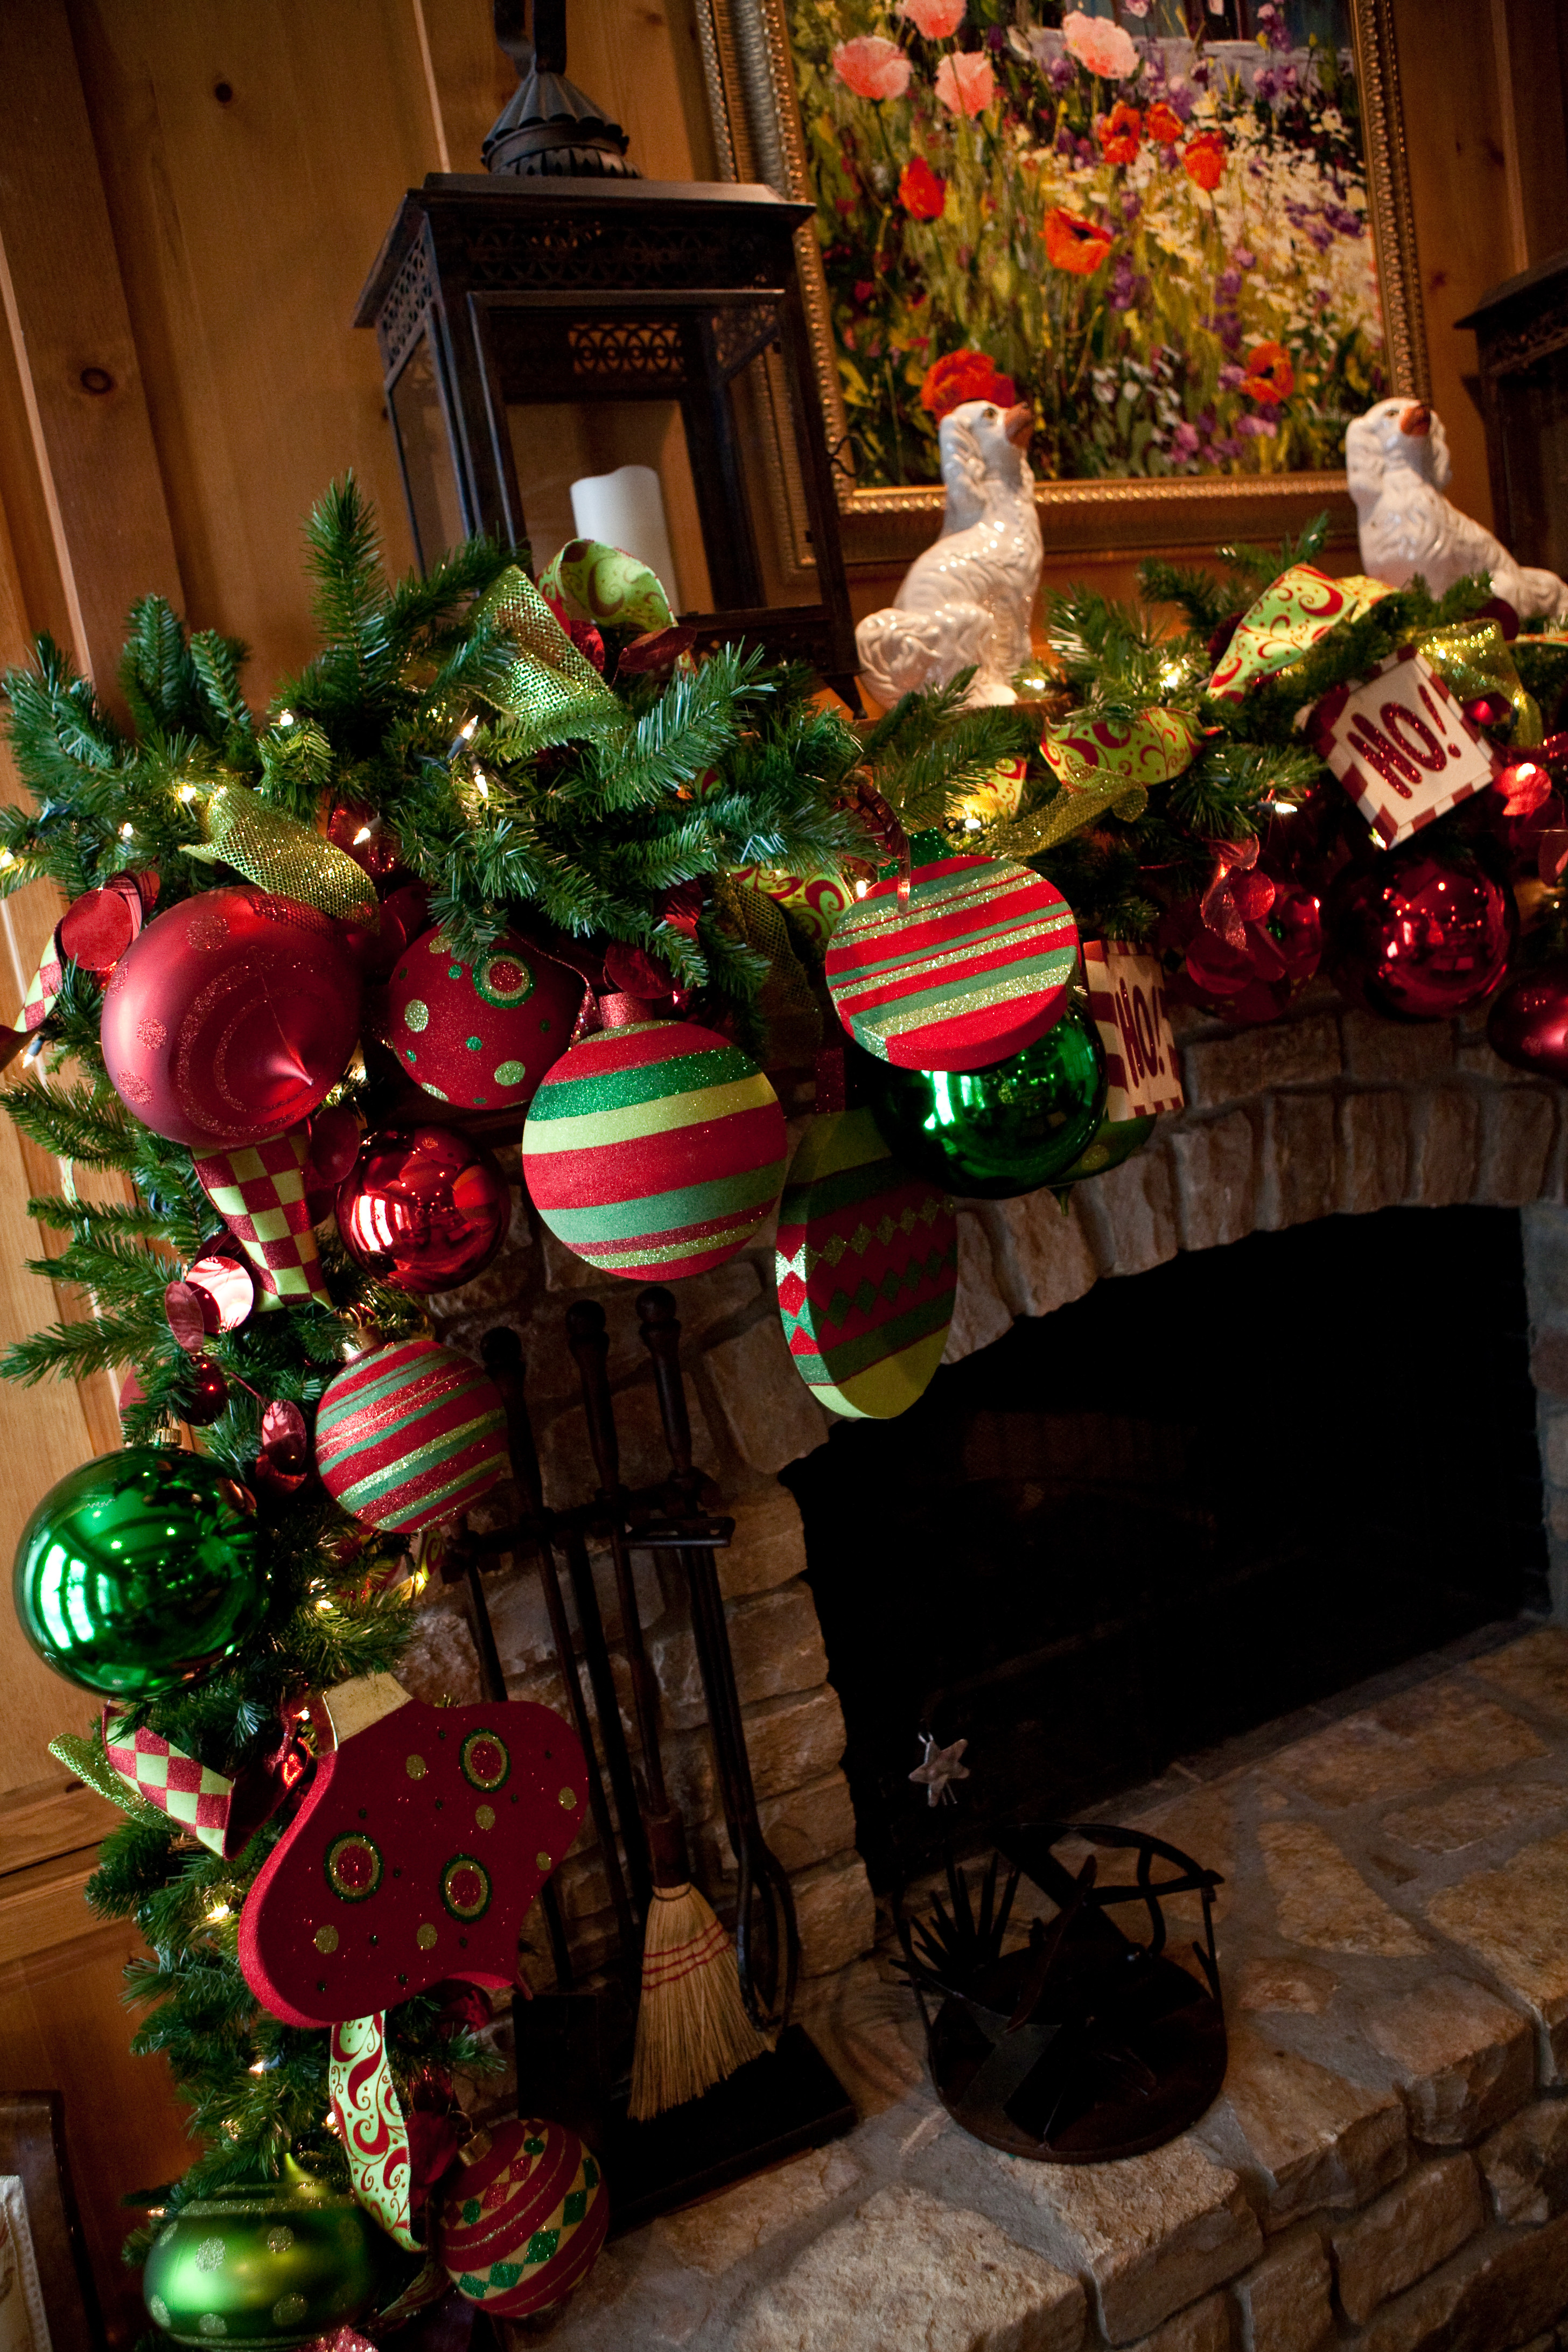 Christmas Garland For Fireplace Mantel
 Show Me a Mantel Many Merry Ways……